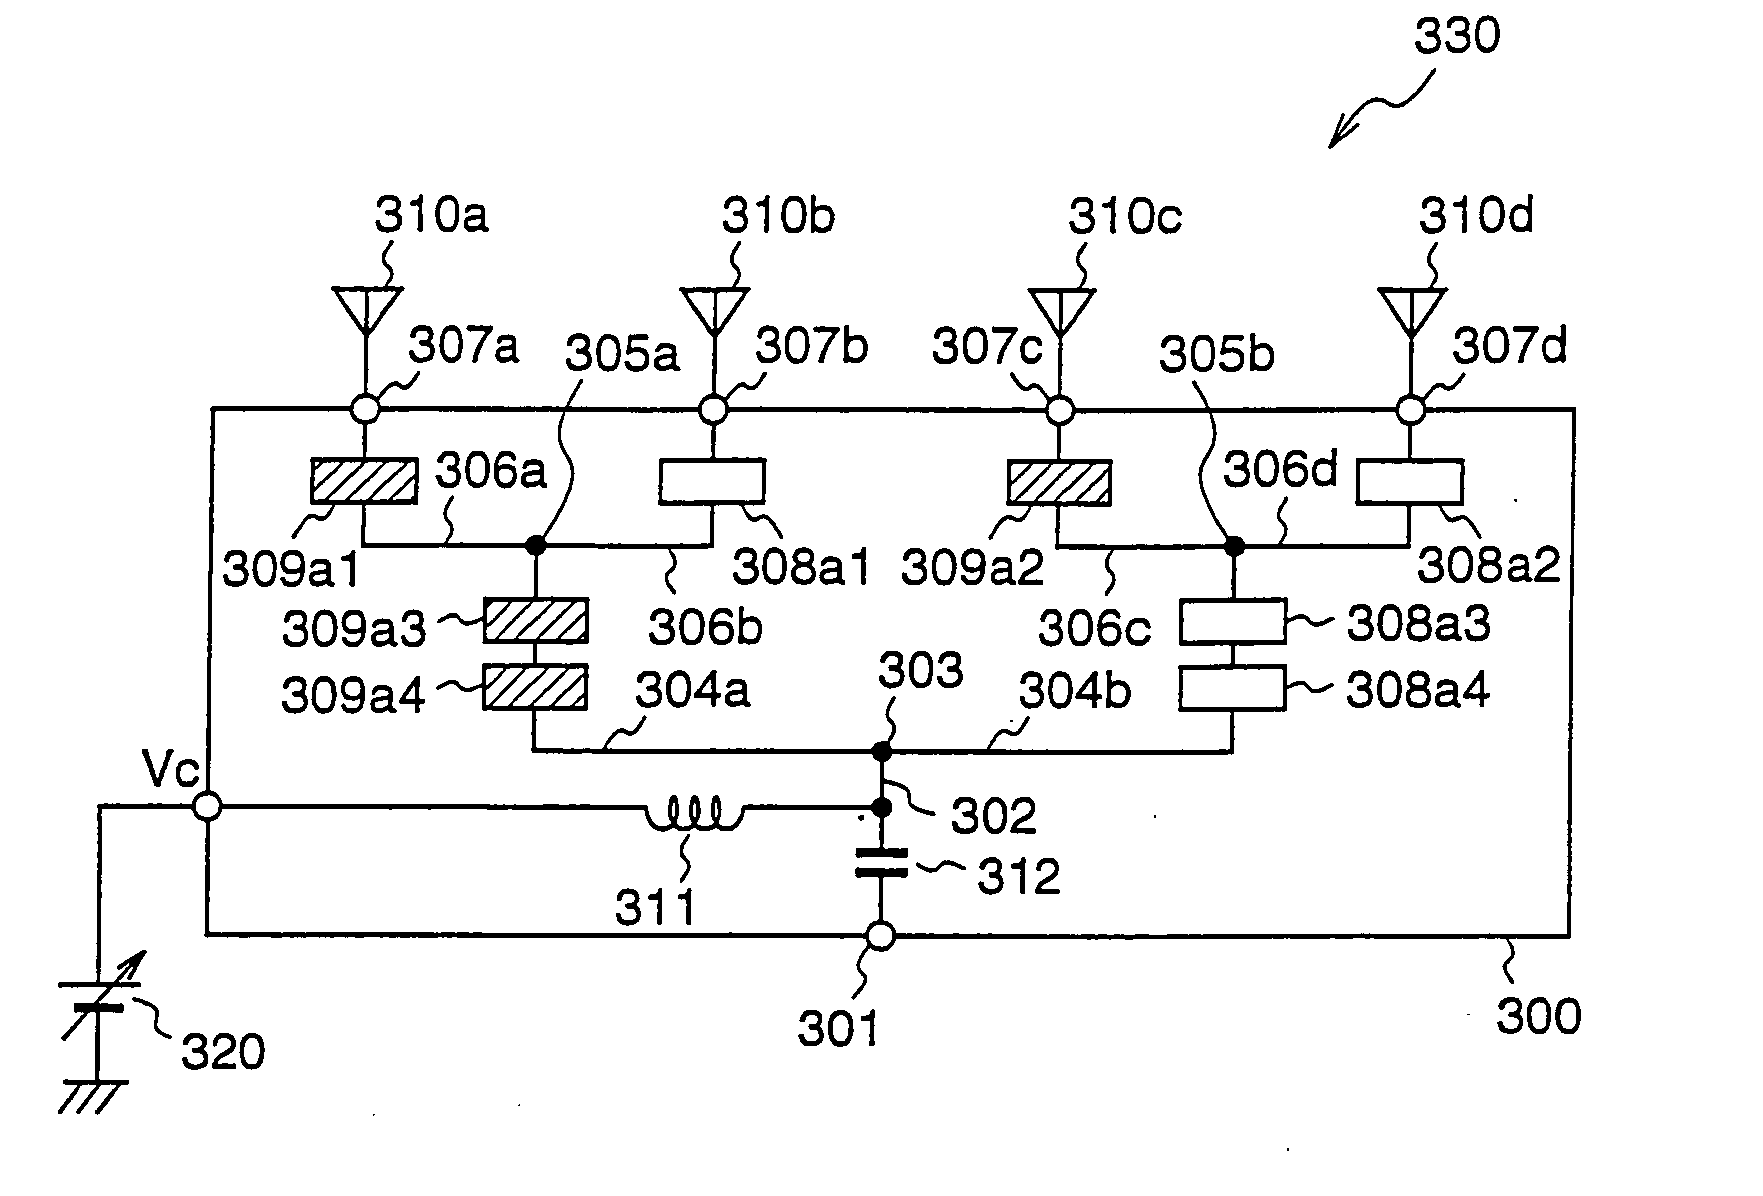 Antenna control unit and phased-array antenna